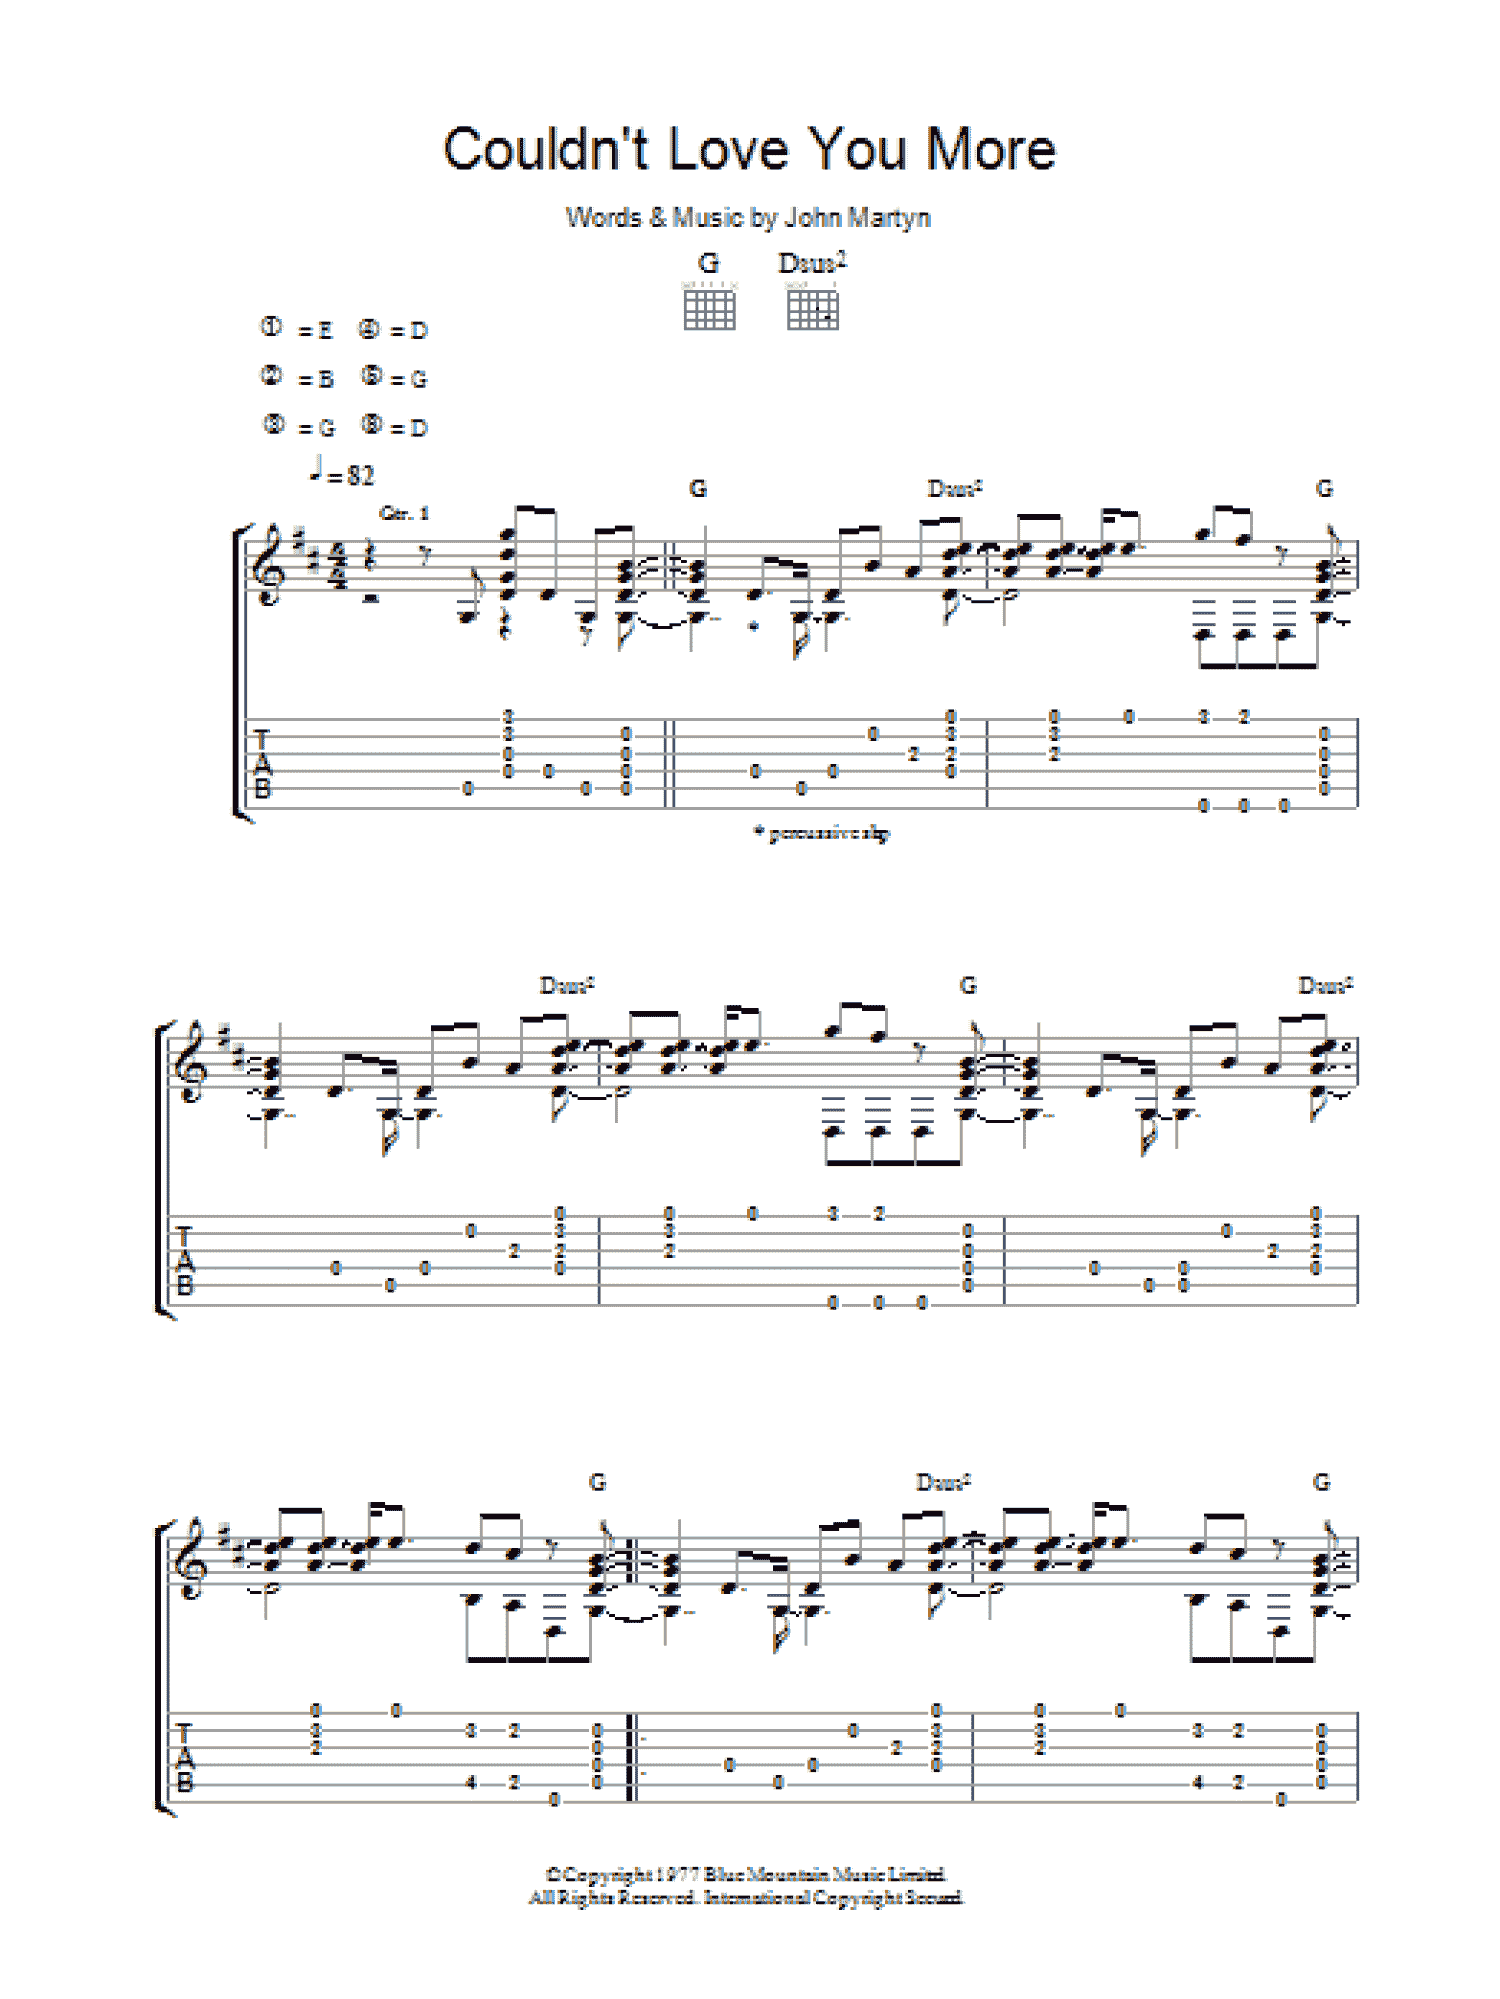 Couldn't Love You More (Guitar Tab)